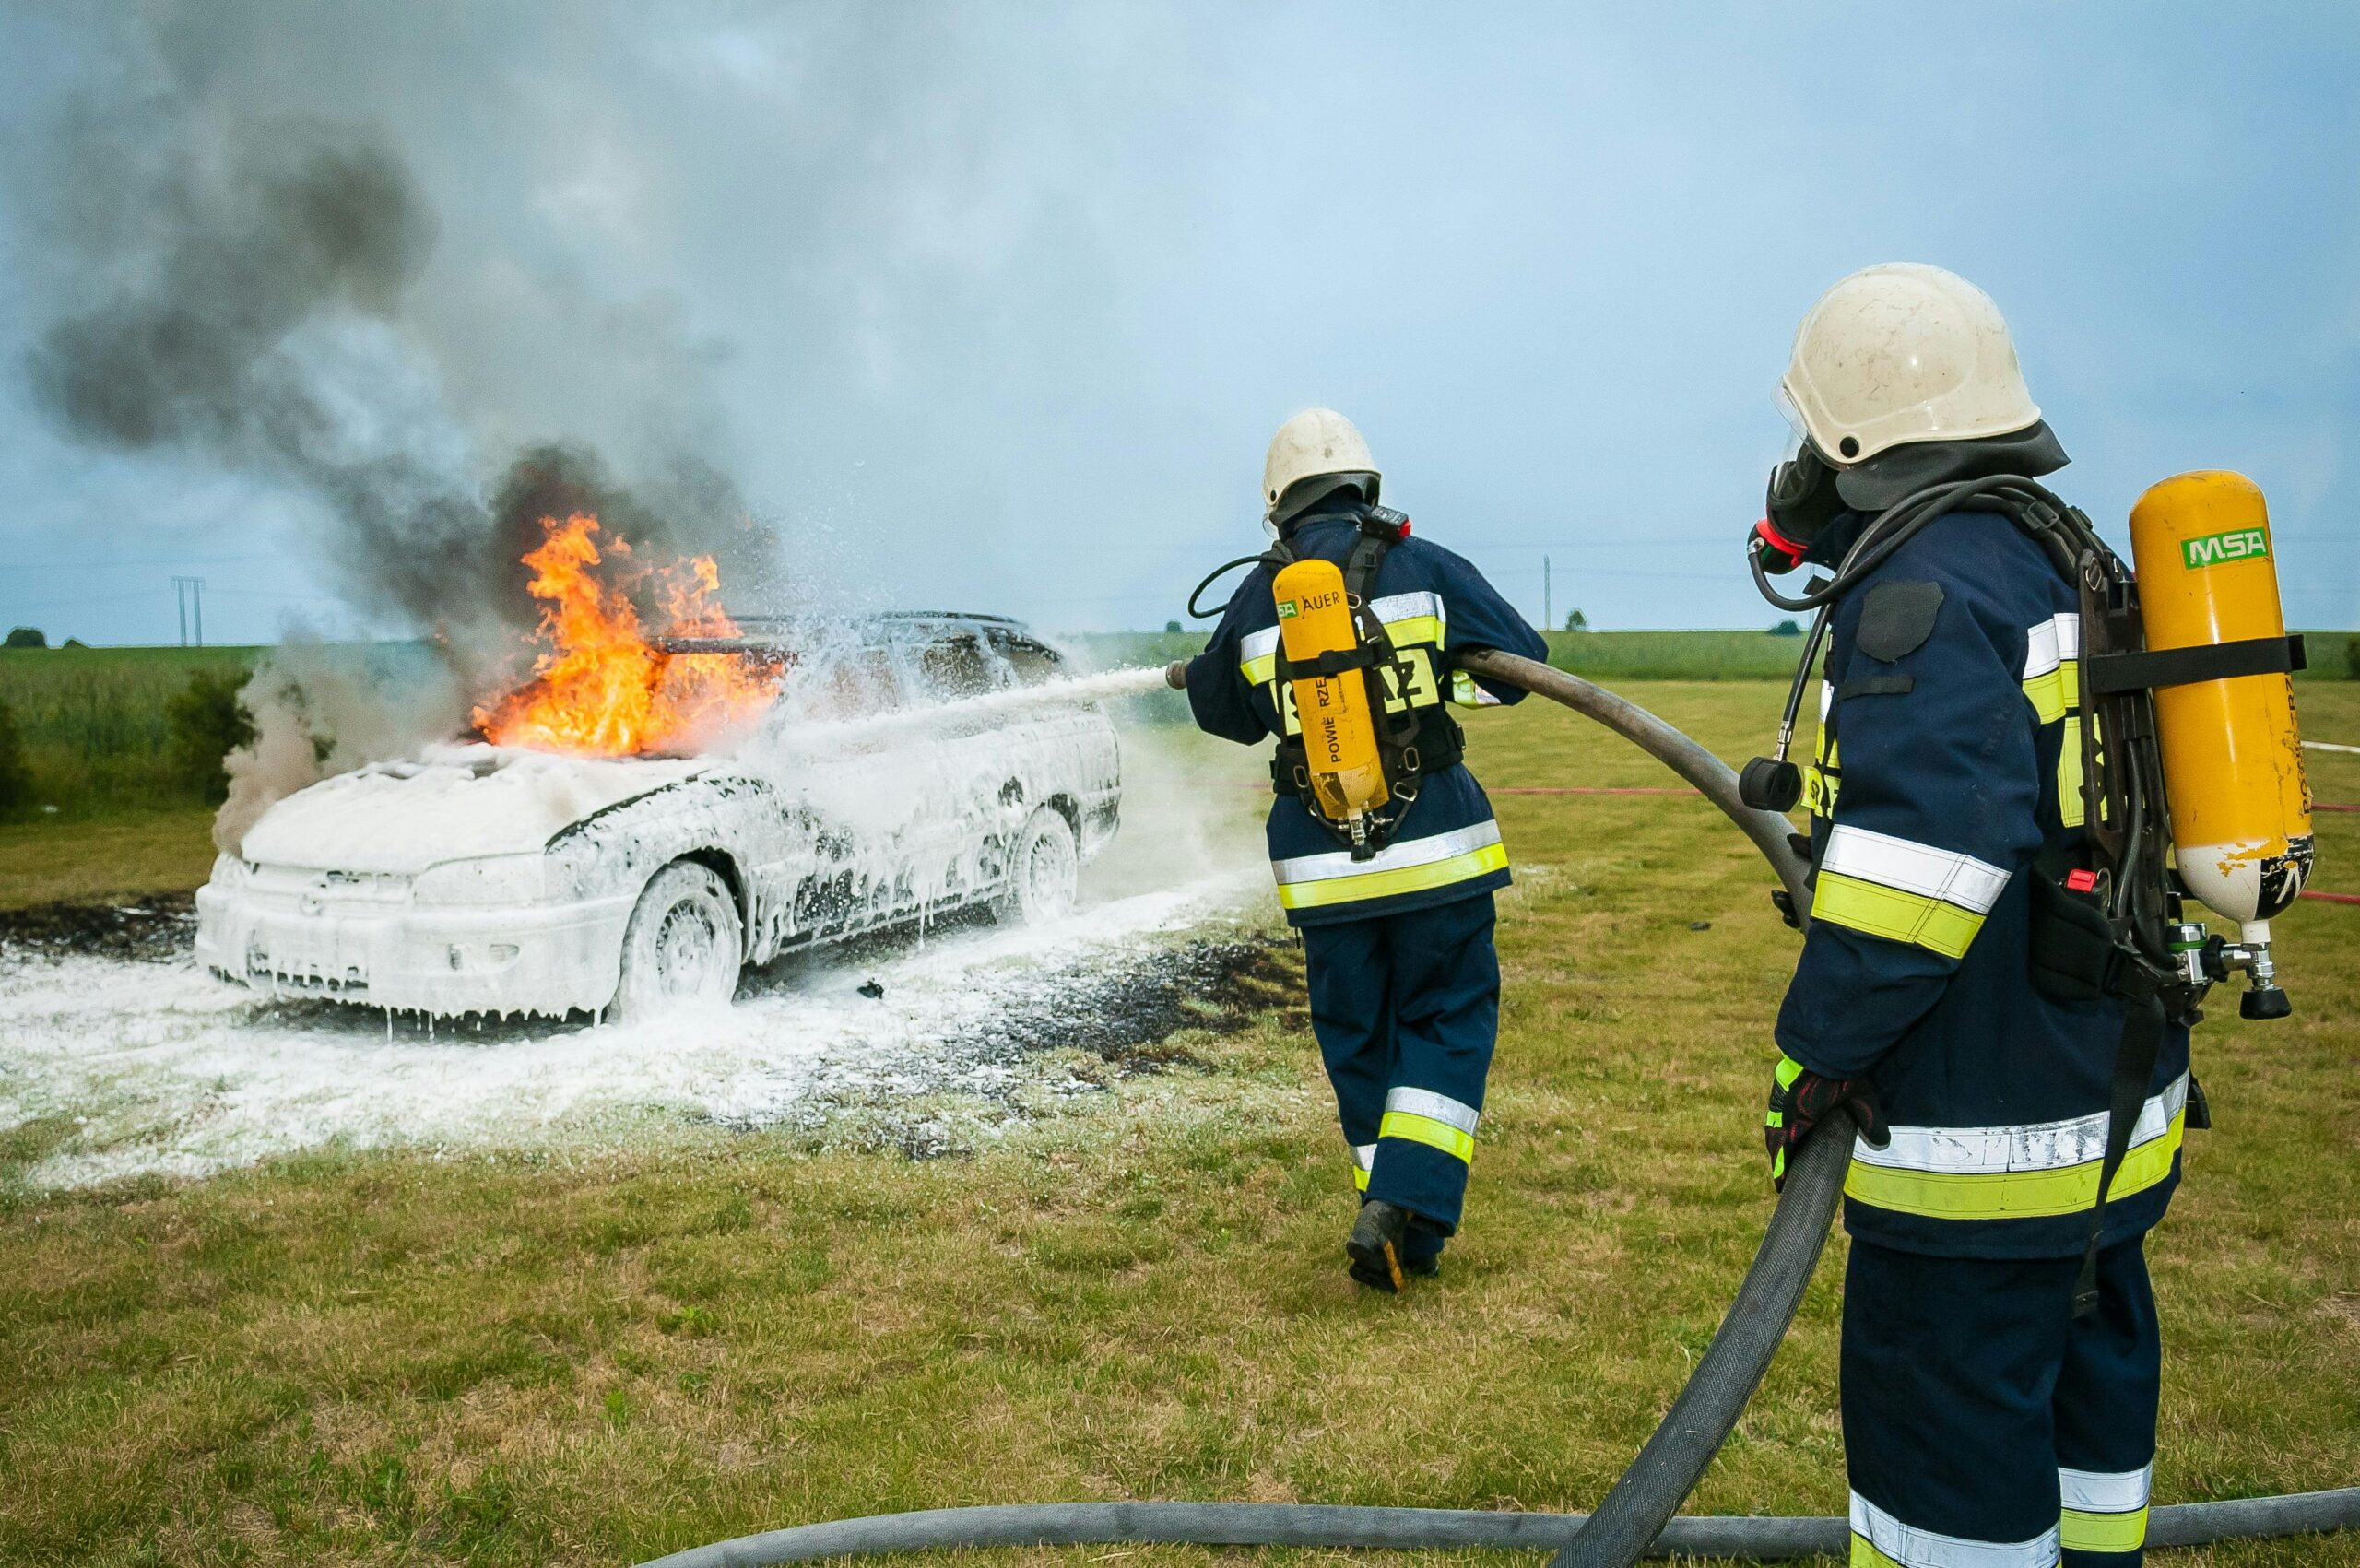 How AFFF Firefighting Foam Weakens Your Immune System?